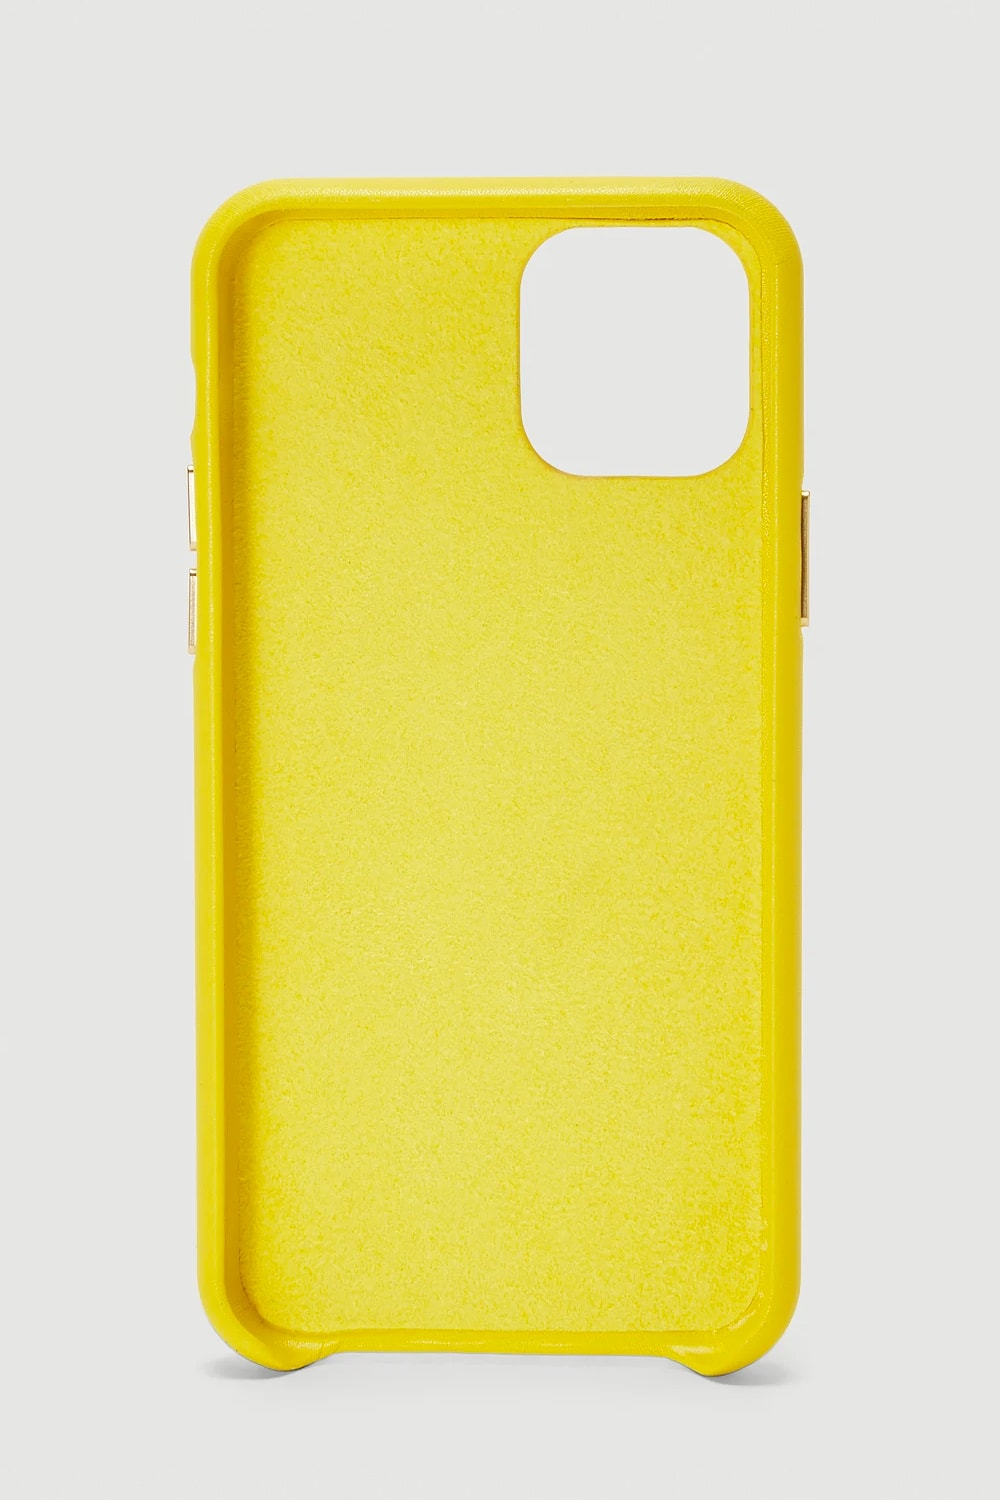 Vetements x DHL Apple iPhone 11 Case Release Info red yellow 2017 2018 